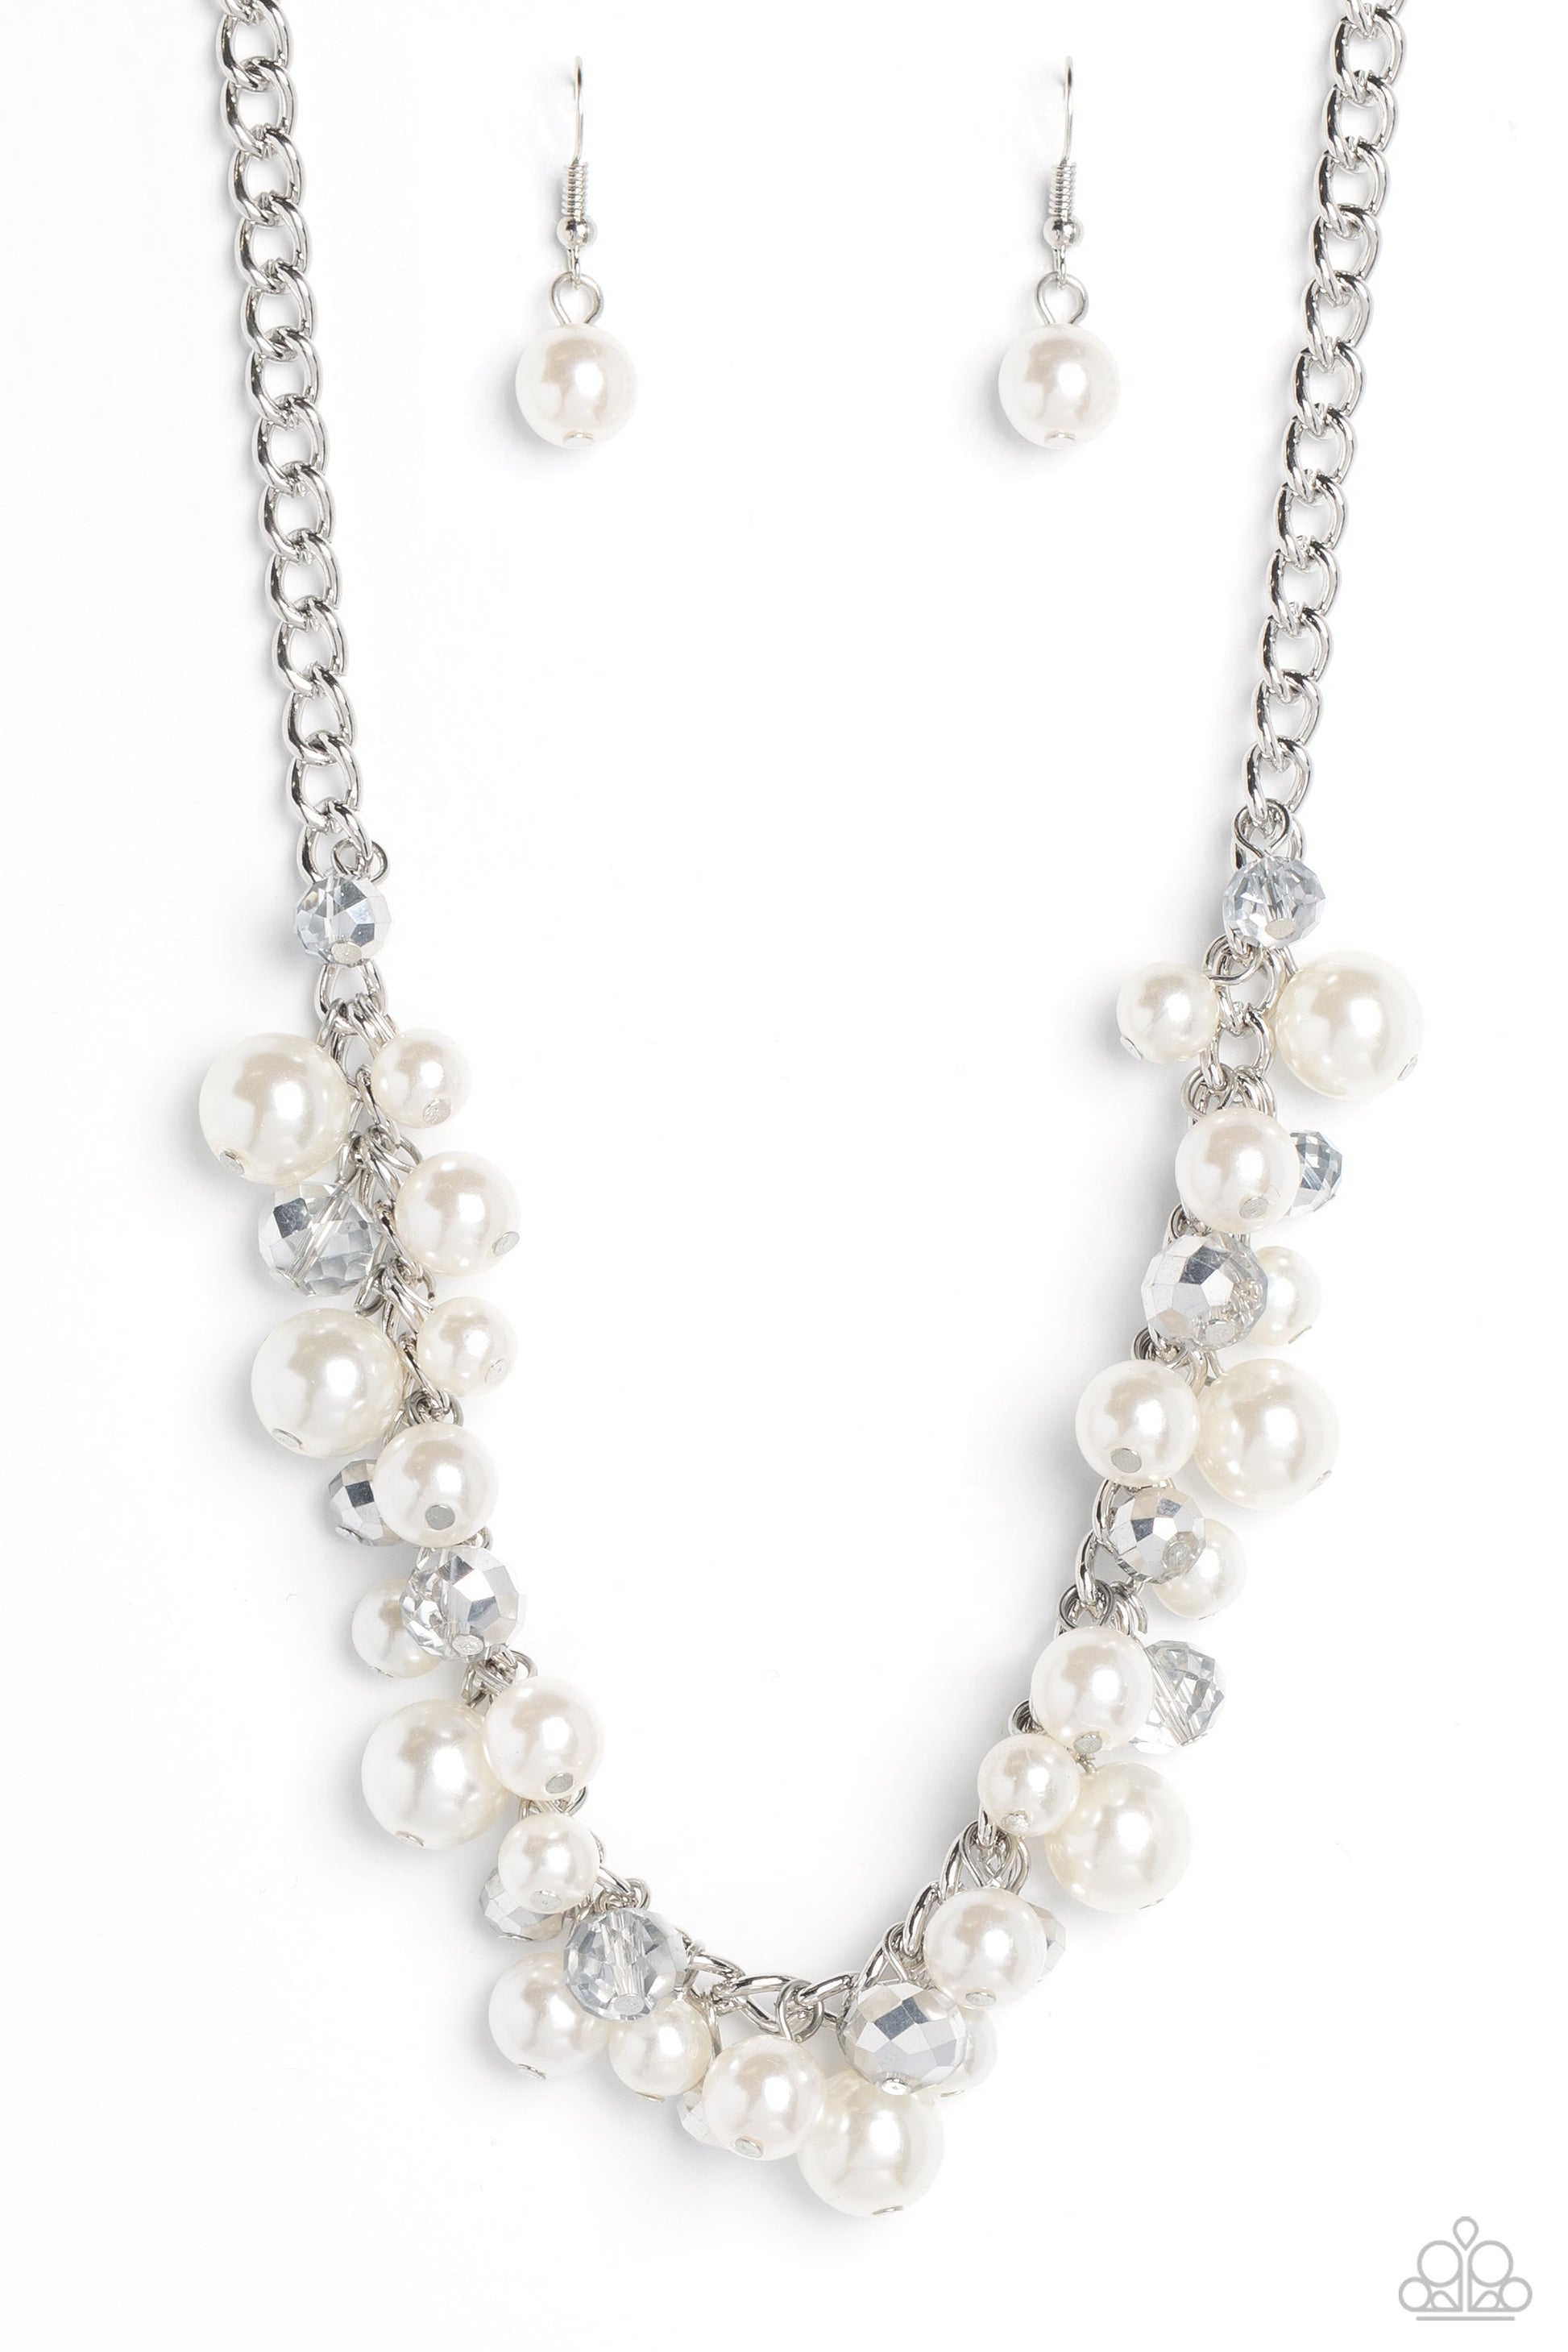 Glinting Goddess - White Pearl and Silver Necklace - Paparazzi Accessories - A faceted collection of glassy, silver crystal-like beads and classic white pearls in varying sizes flickers and flashes below the collar on a thick silver curb chain for a refined shimmer.